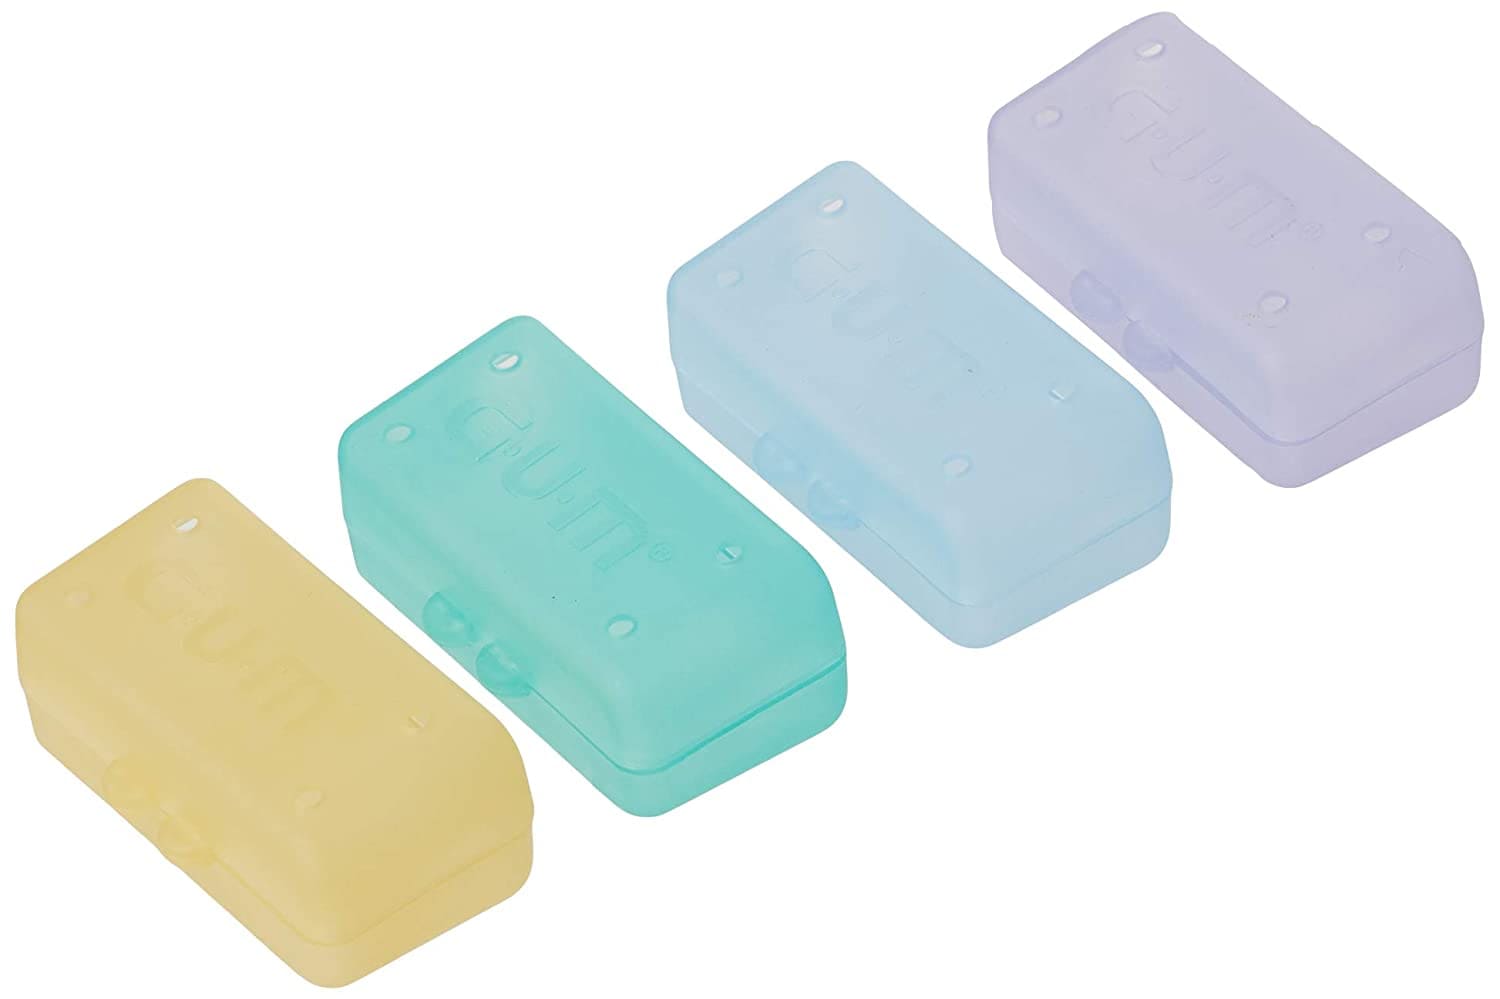 GUM toothbrush covers